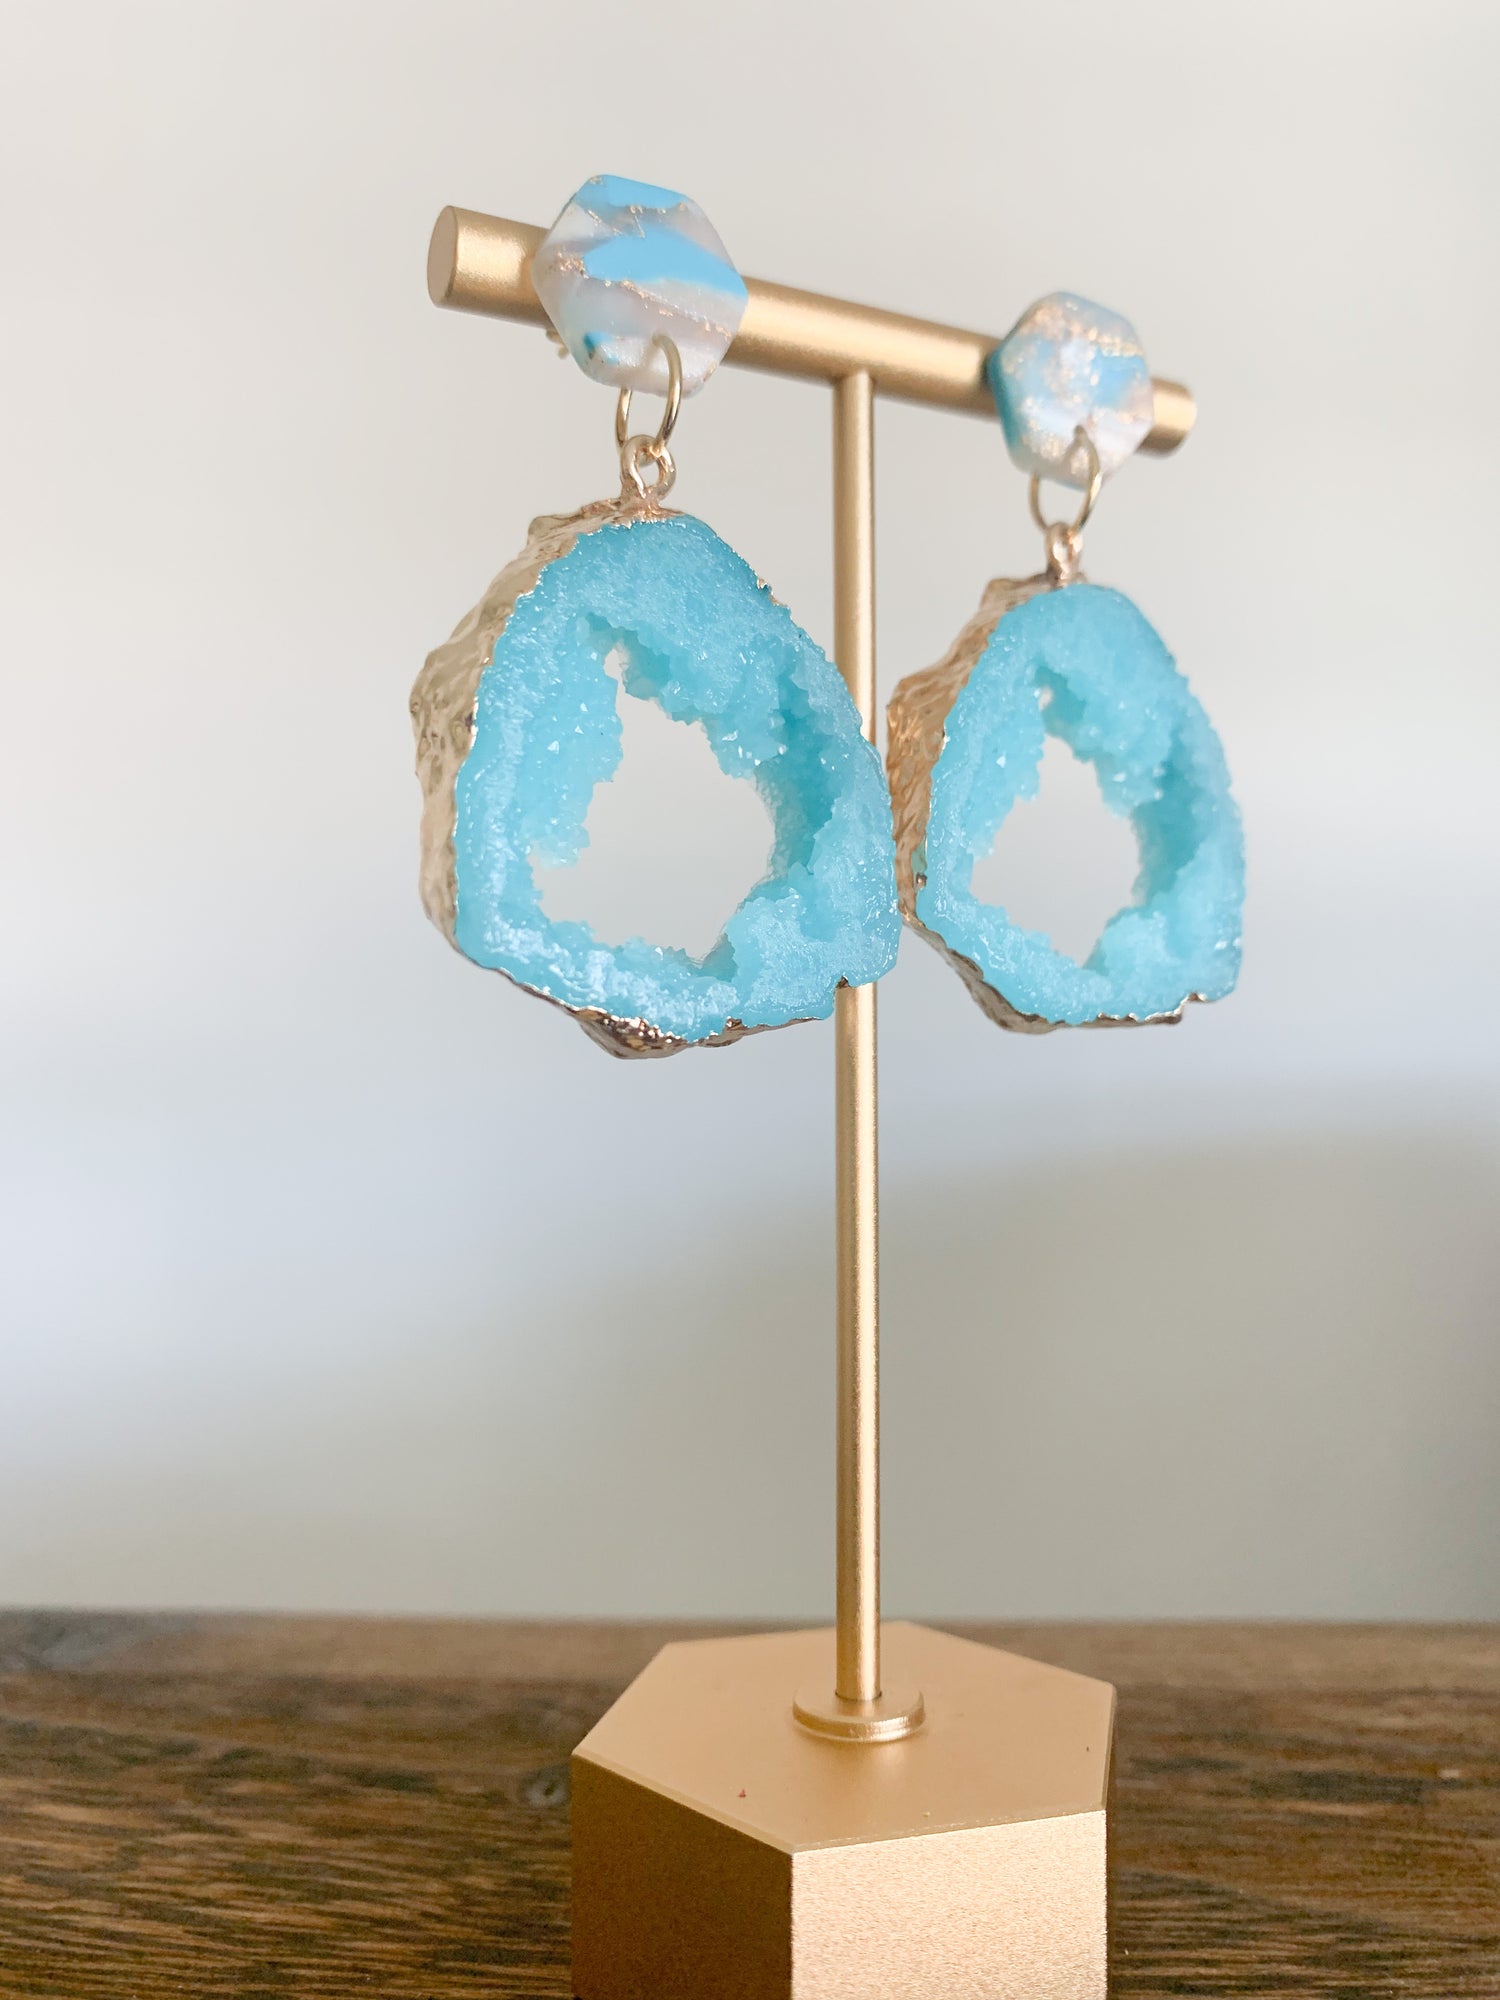 Handmade polymer clay earrings with a large druzy resin charm